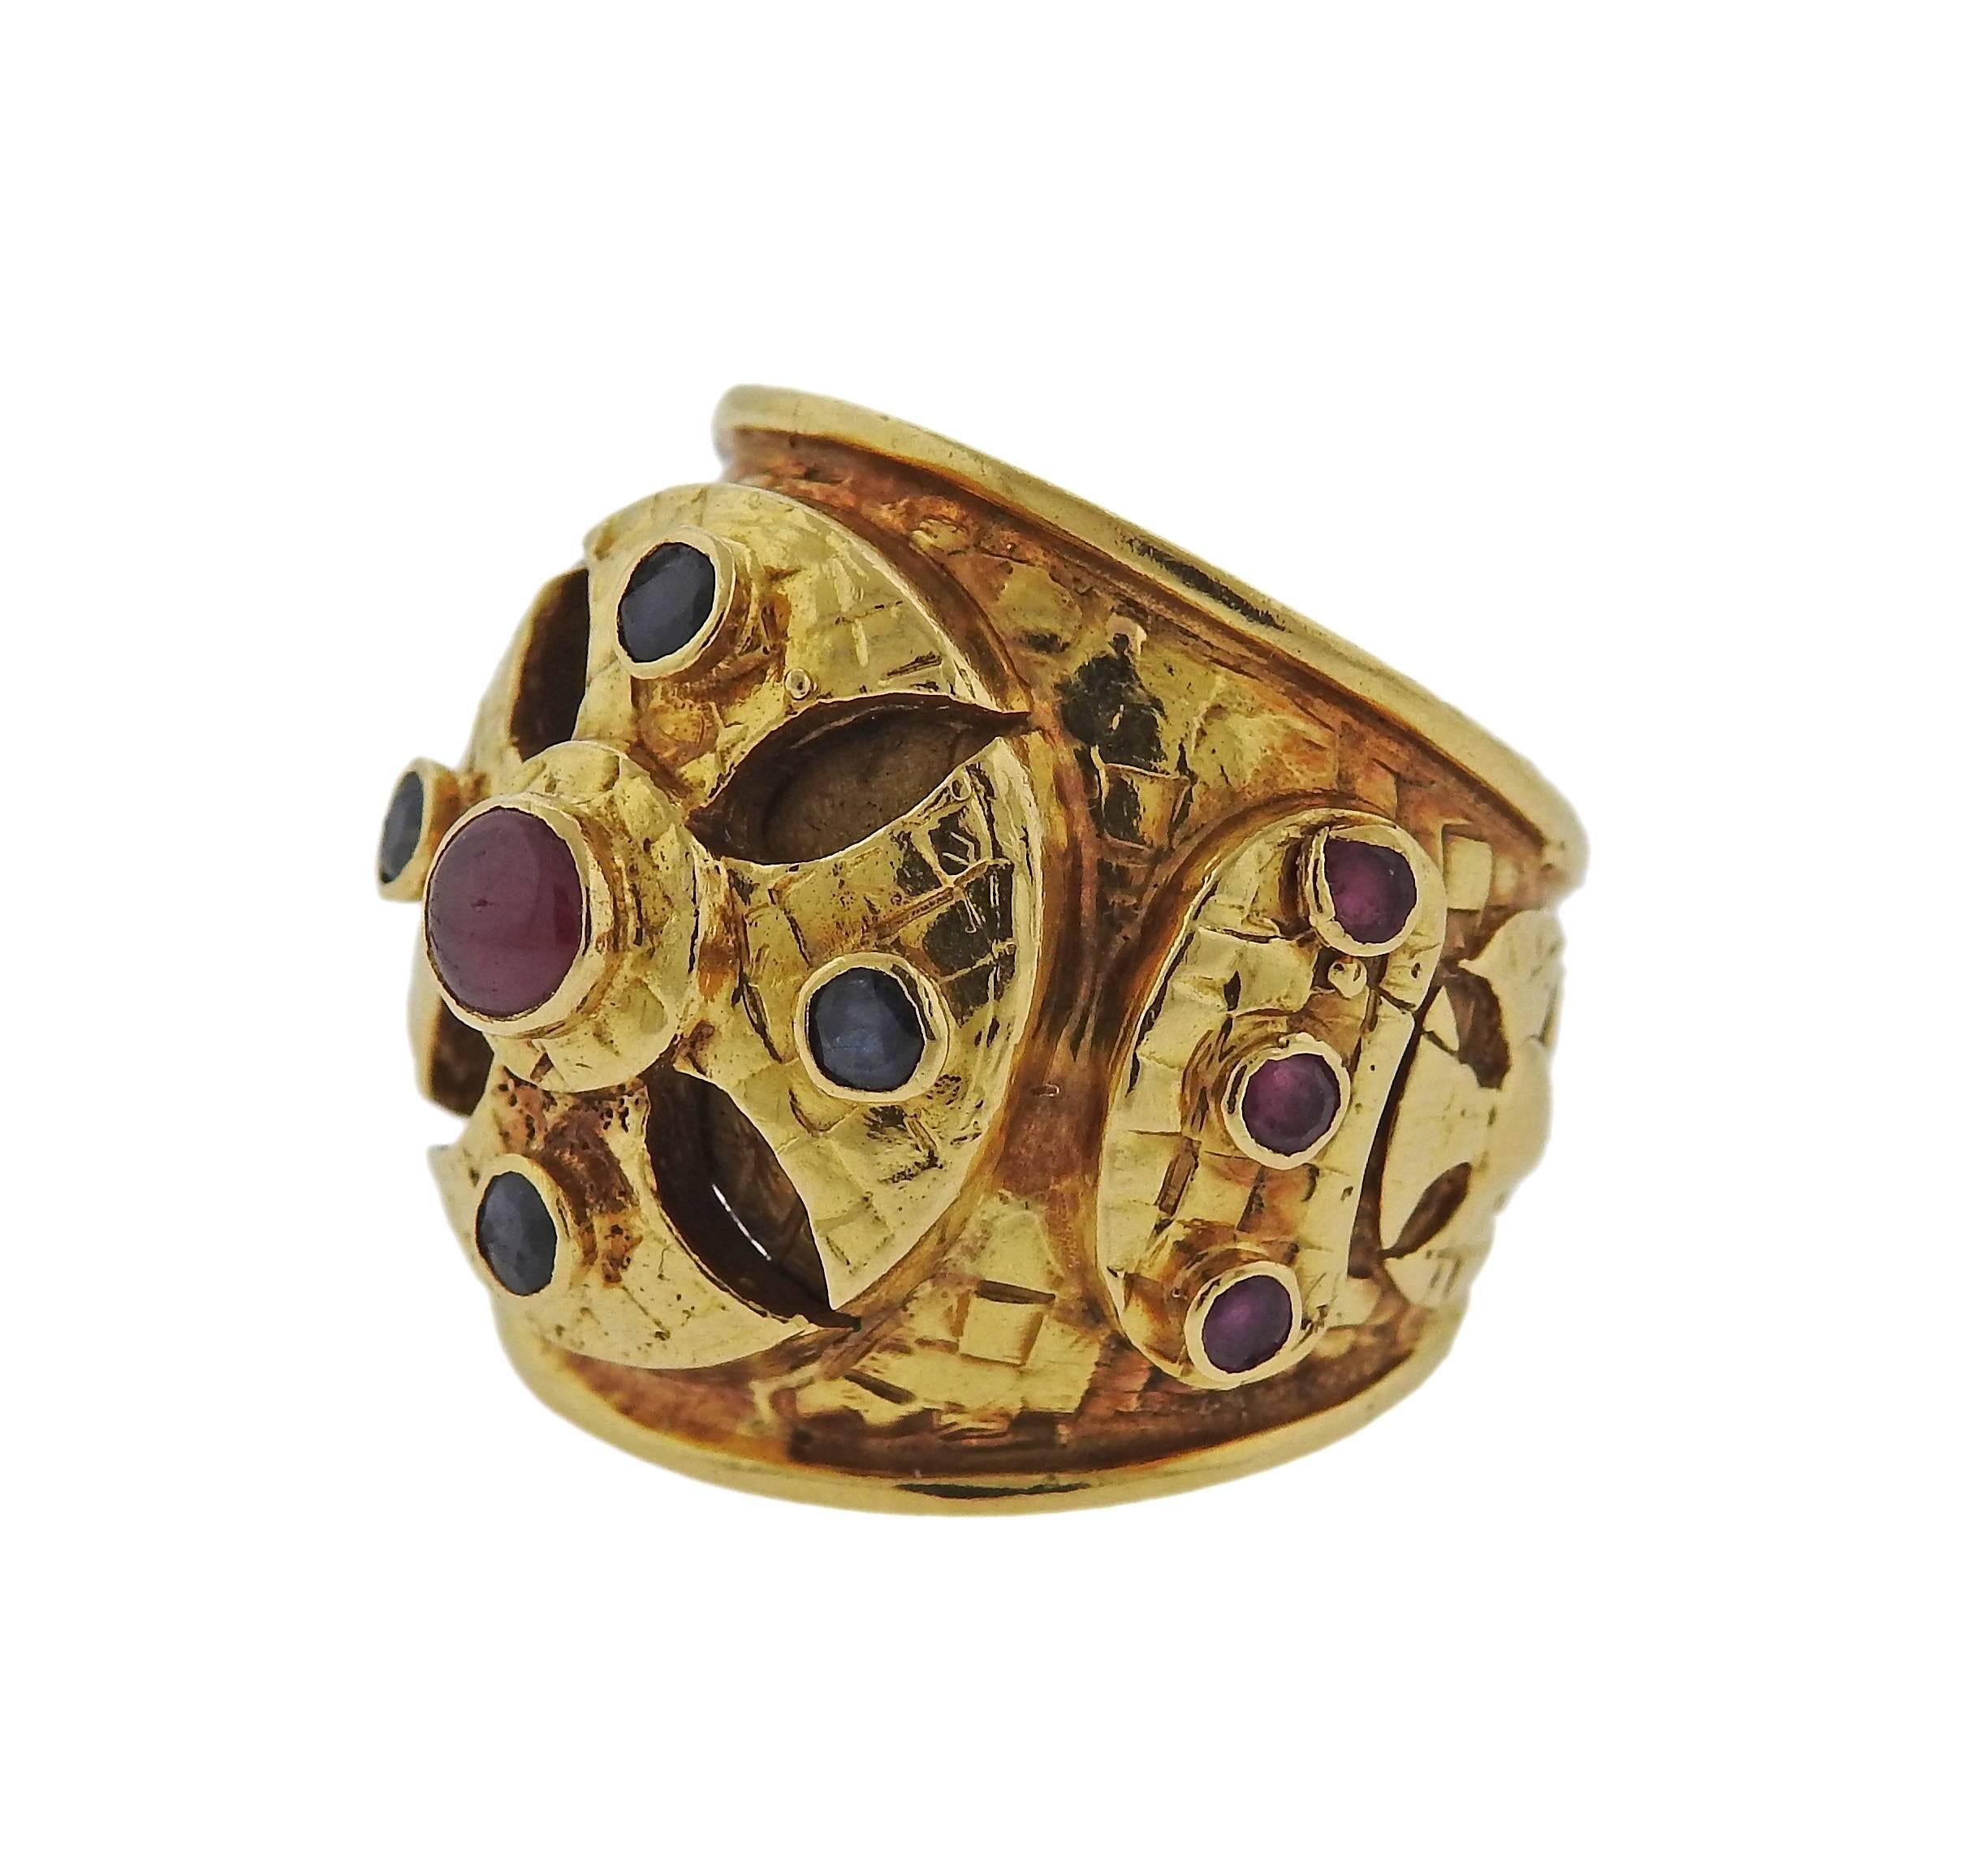 An 18k gold dome band ring featuring ruby and sapphires, crafted by Ilias Lalaounis. Ring is a size 6.5 and measures 23.2mm at widest point. Marked Ilias Lalaounis, Maker's Hallmark, A21, 750. Weight is 17.2 grams. 